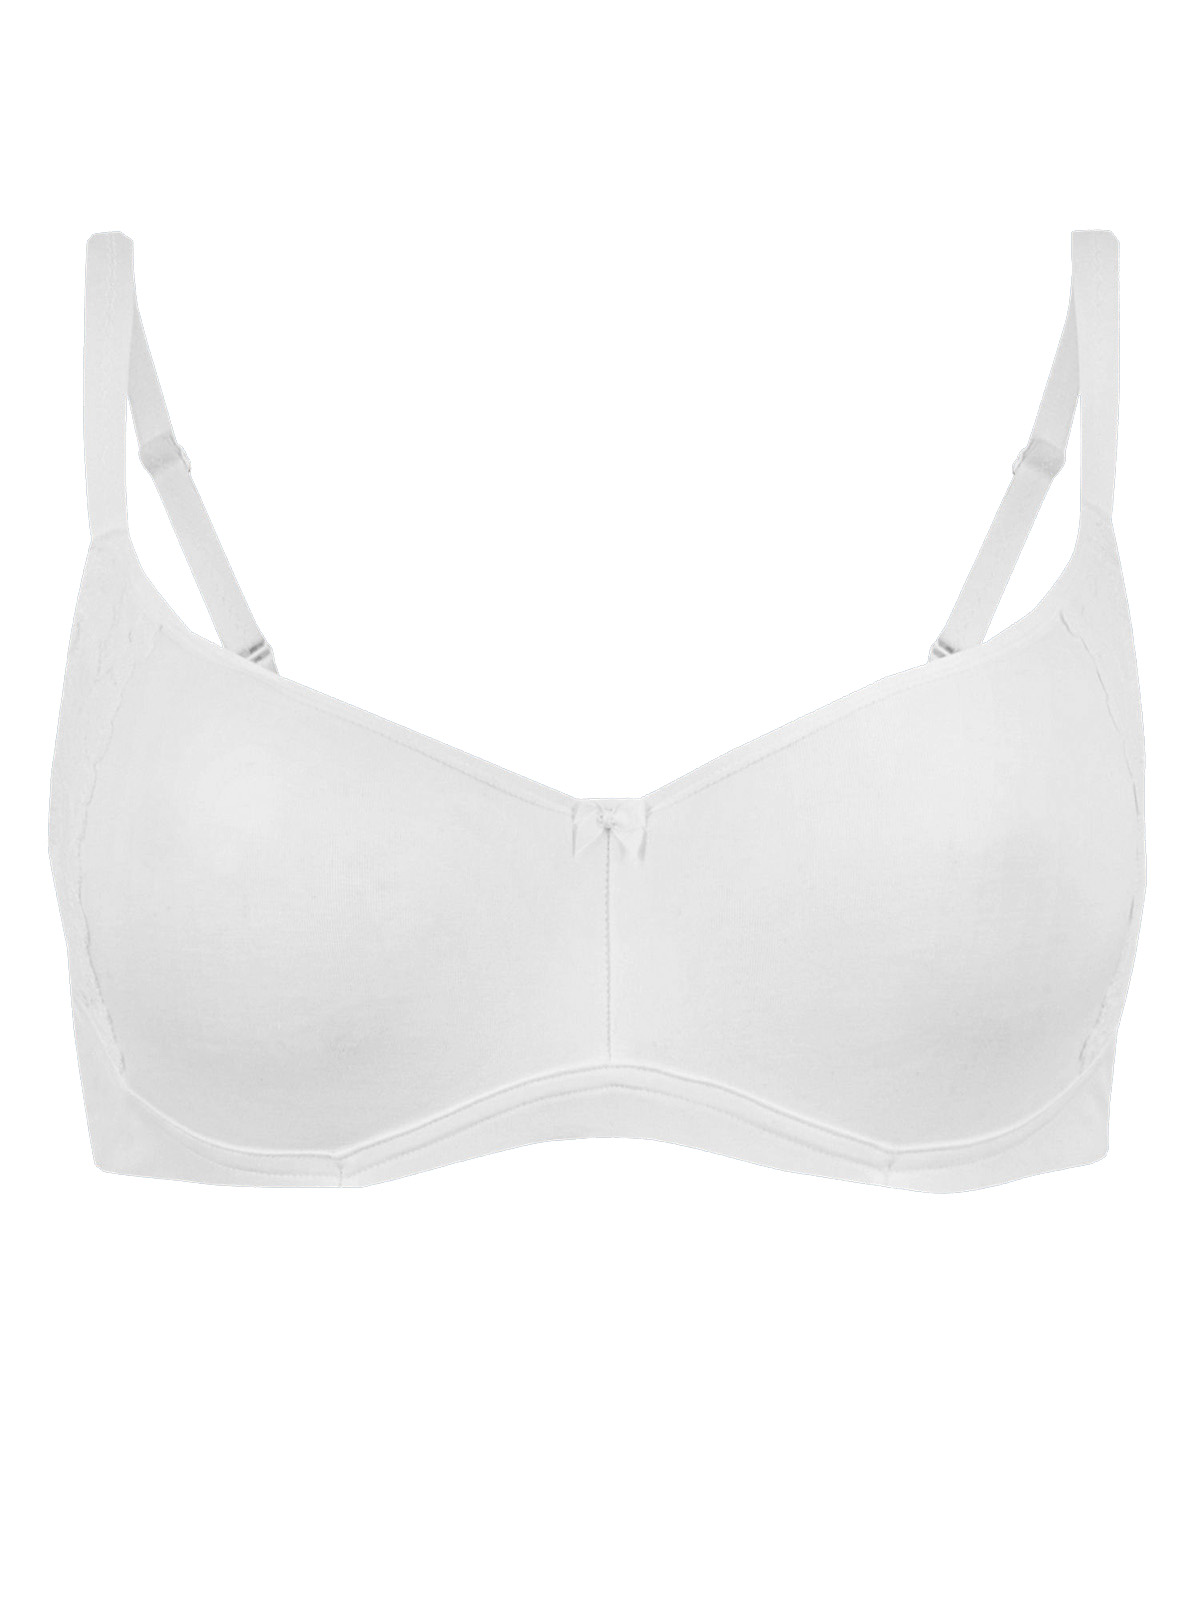 Cocoon full cup bra without underwiring in cotton mix white